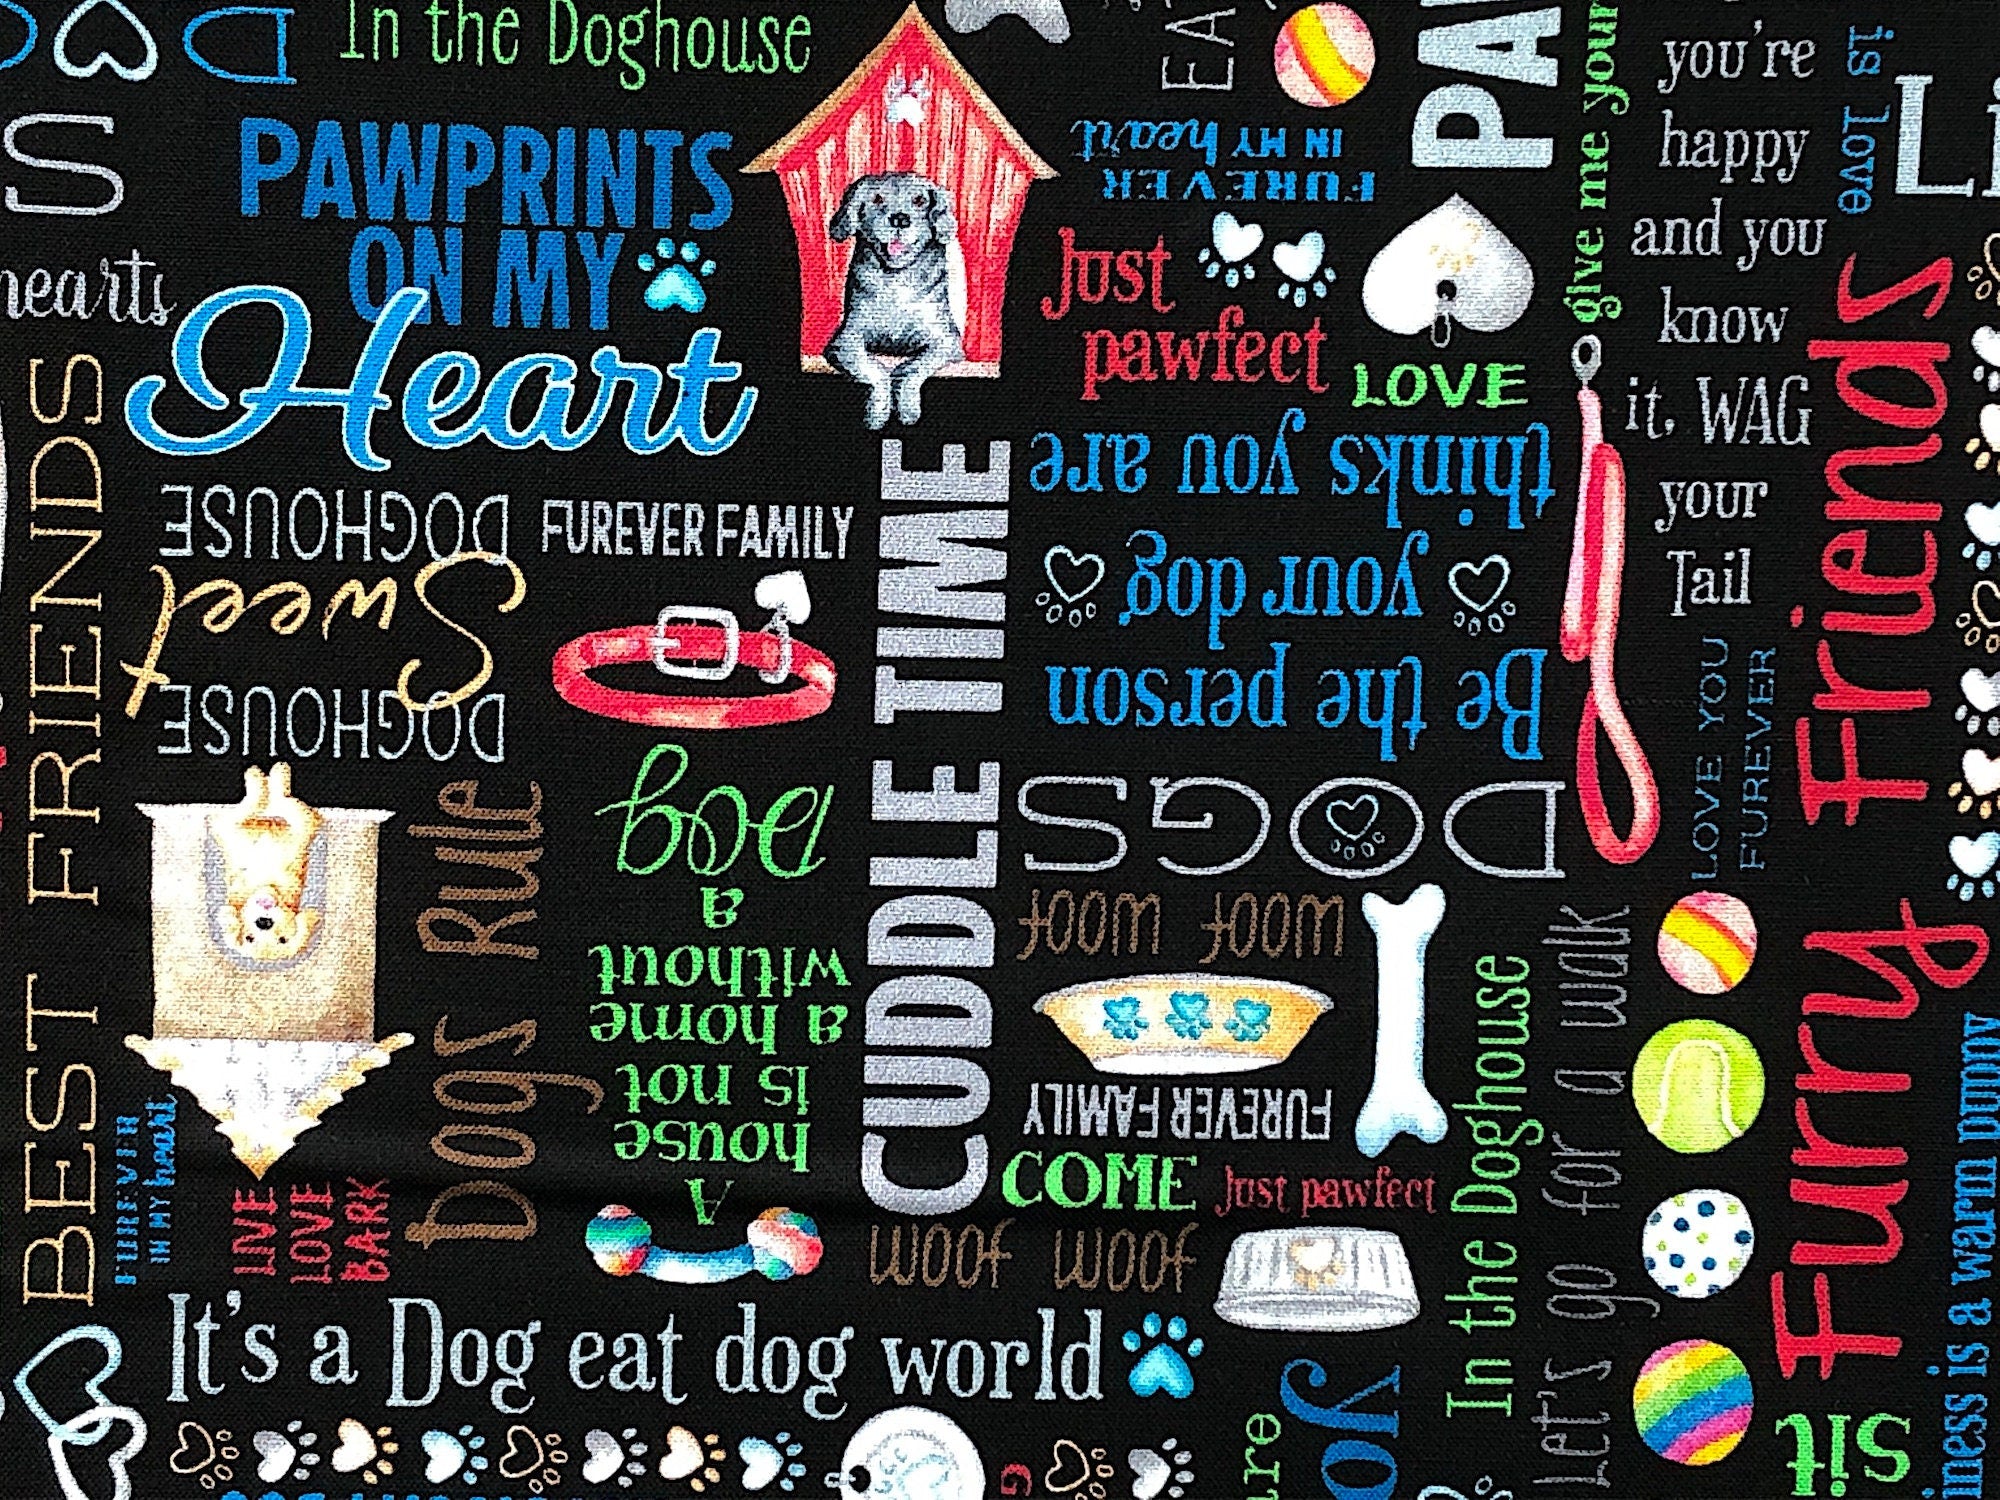 This black fabric is covered with dog sayings such as wag your tail, fetch, life of the dog, hot diggity dog, furry and more.